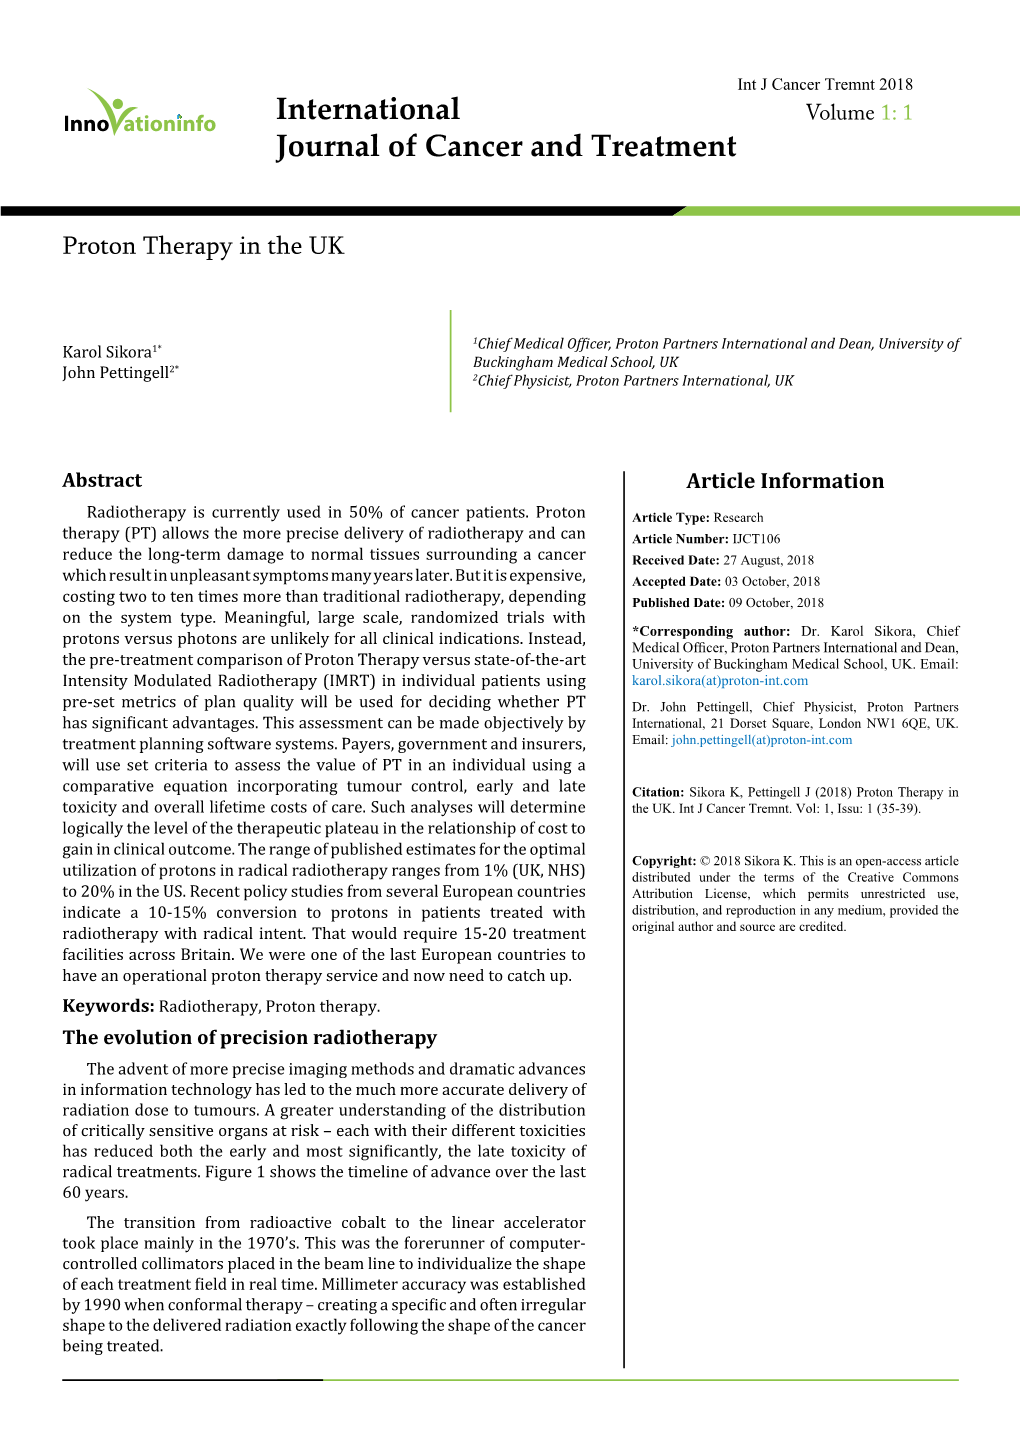 Proton Therapy in the UK